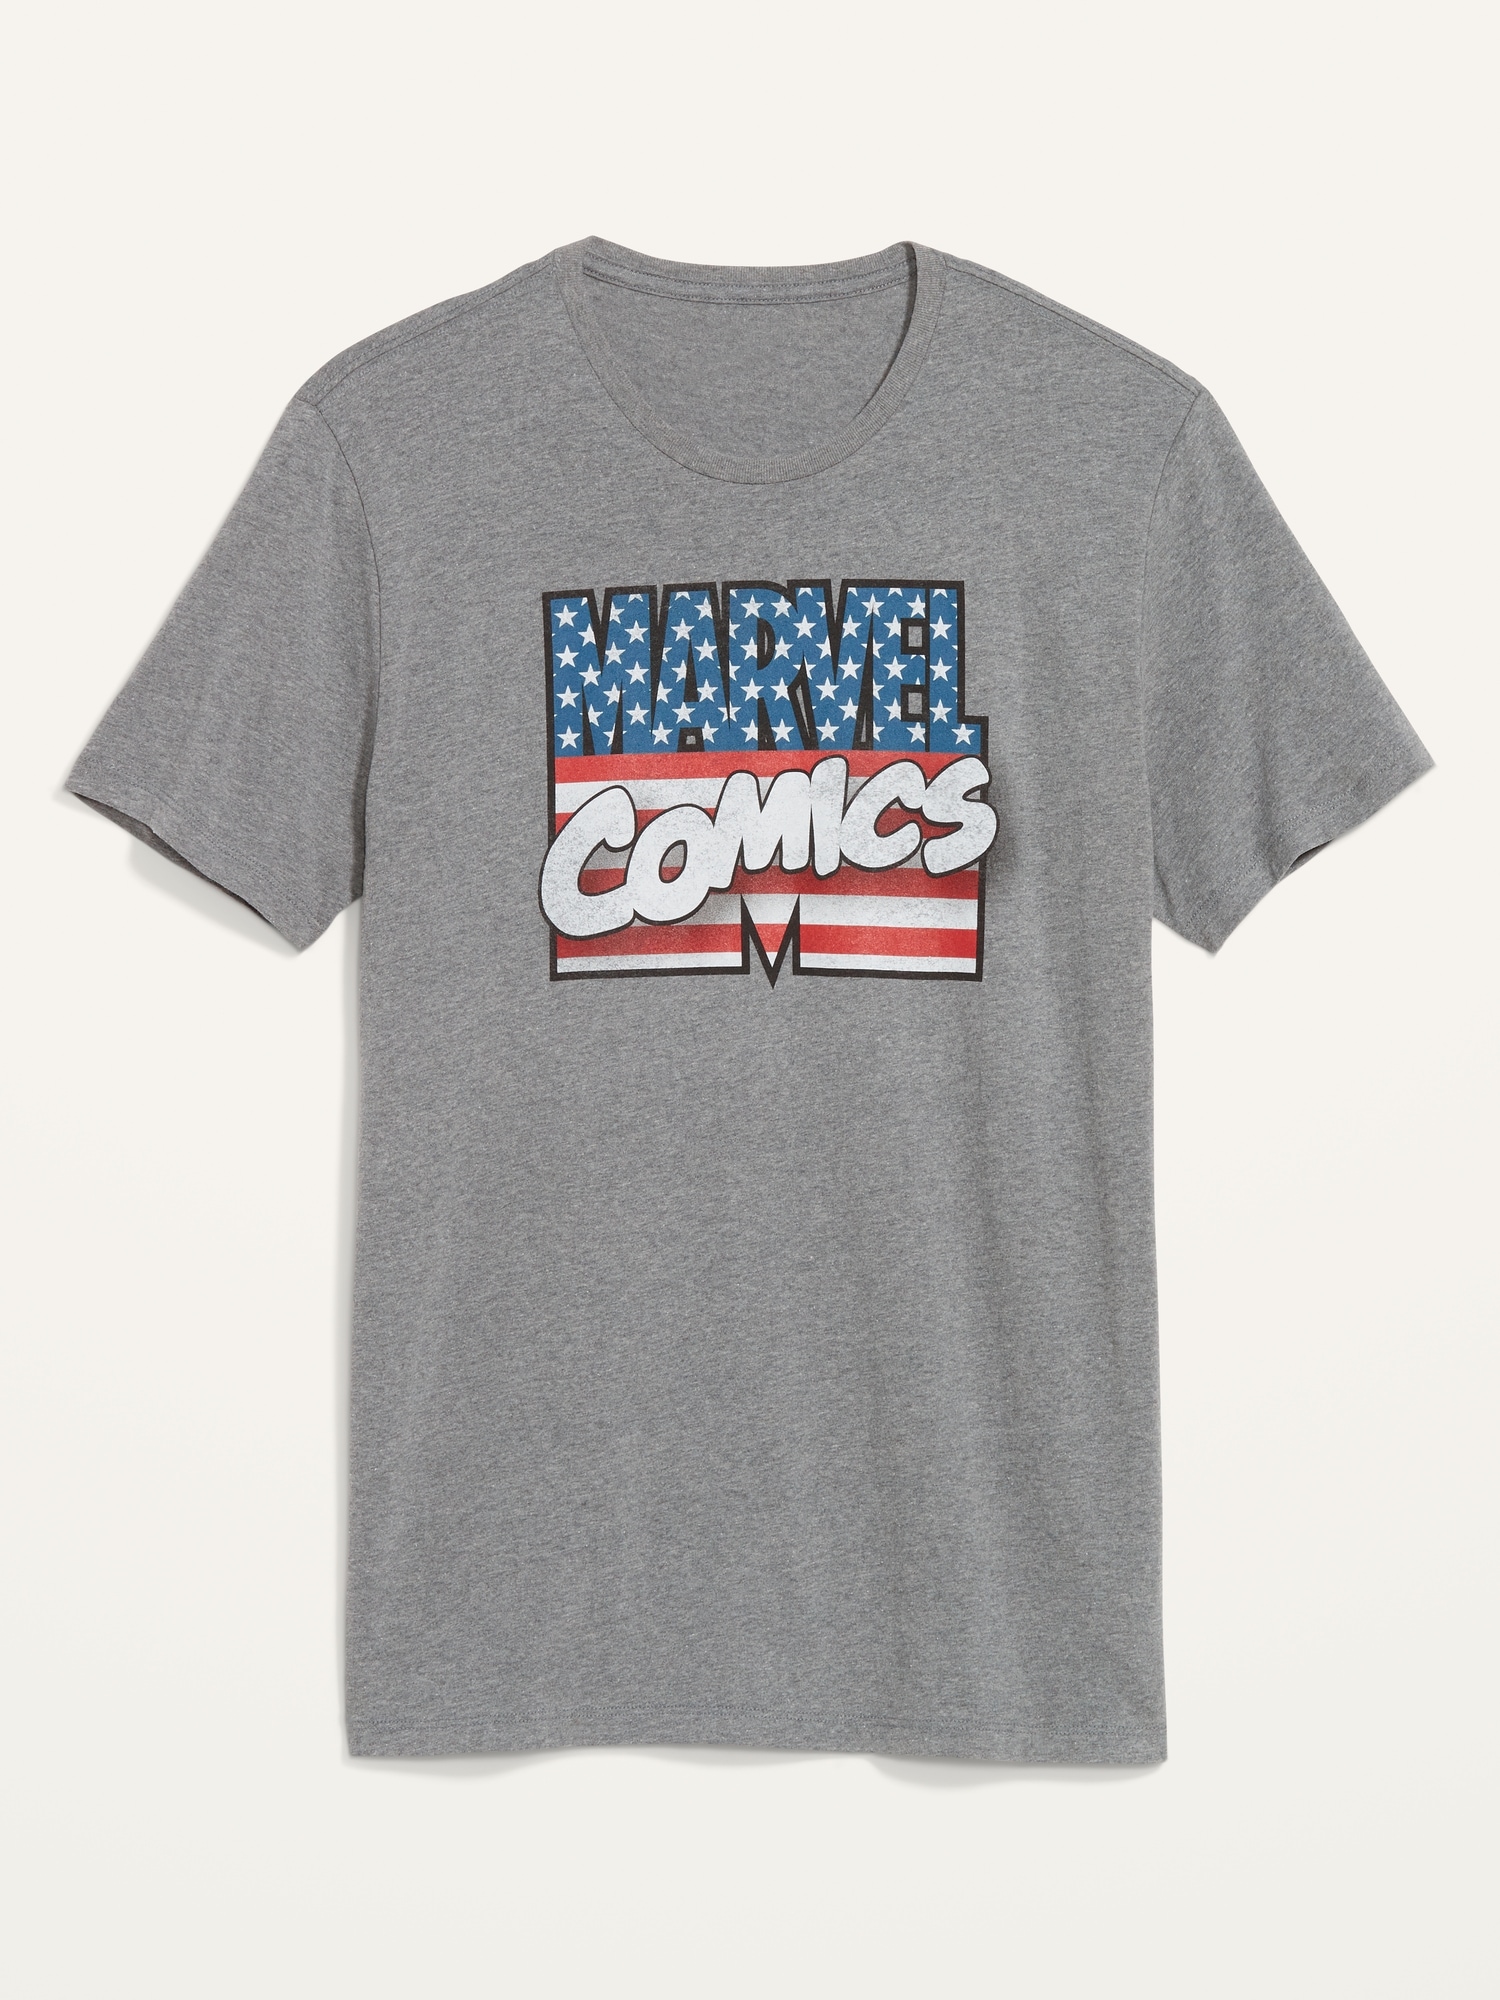 Marvel Comics™ Americana Gender-Neutral T-Shirt for Adults On Sale At Old Navy